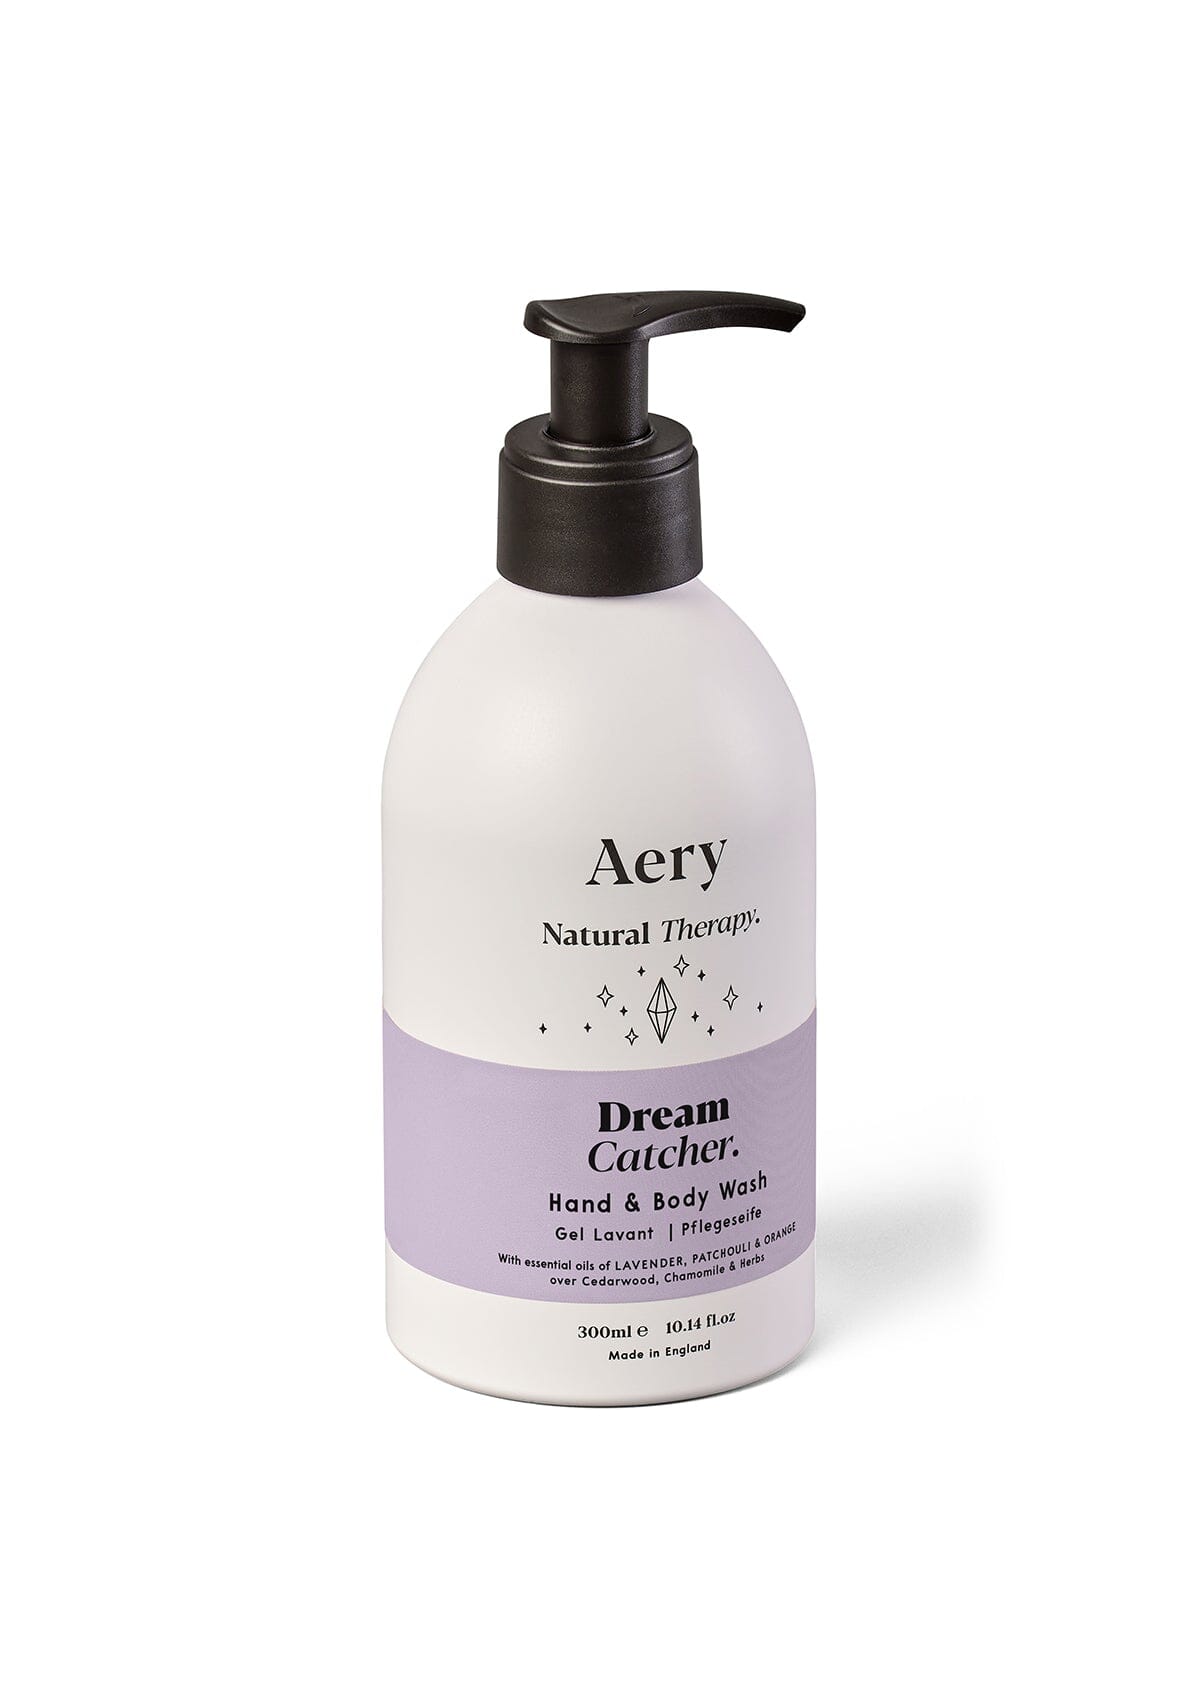 Lilac Dream Catcher Hand and Body Wash by Aery displayed on white background